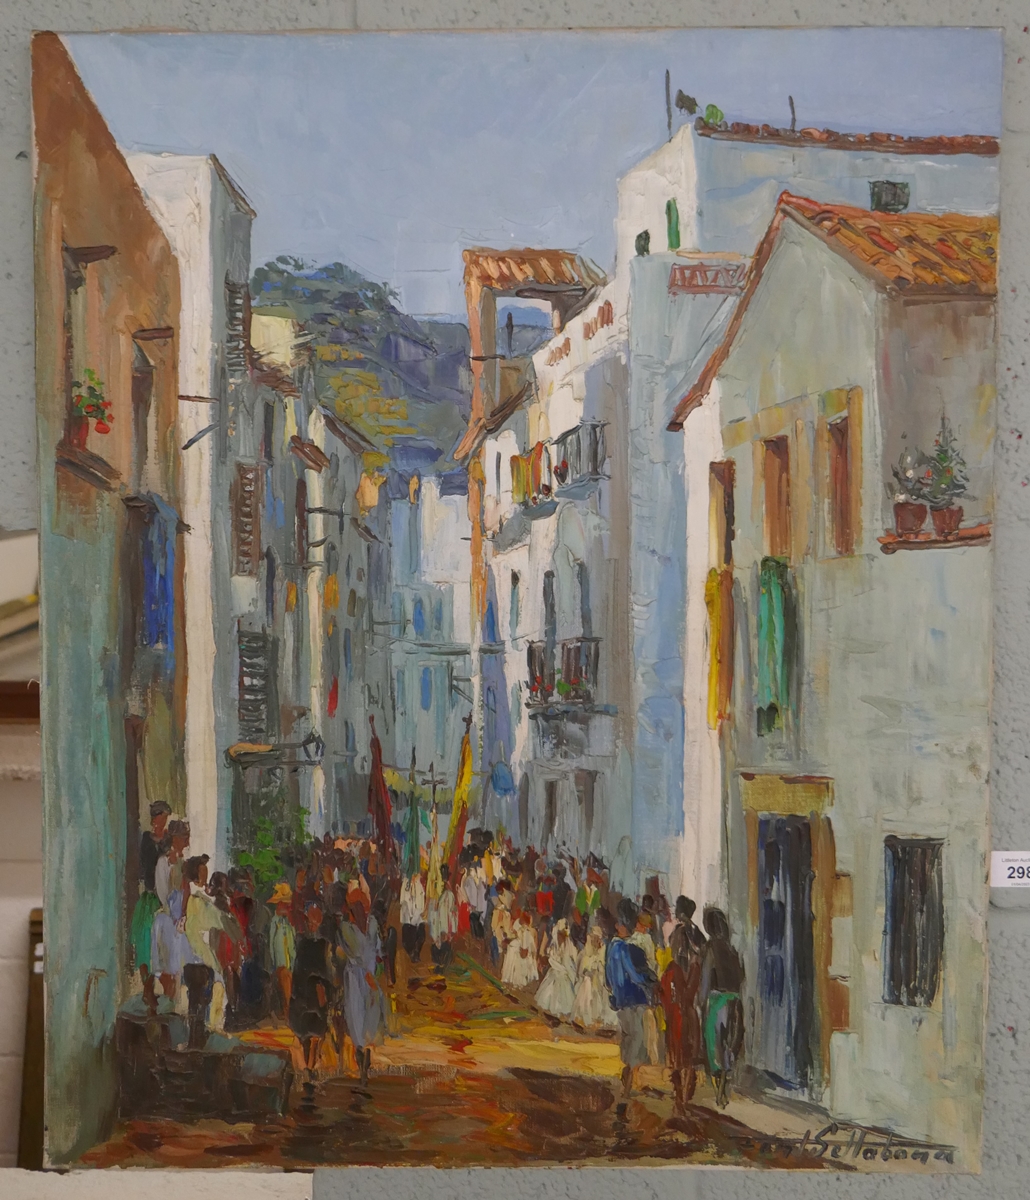 Oil painting by Josep Font Sellbona (1928 - 2010) - Approx image size: 54cm x 65cm